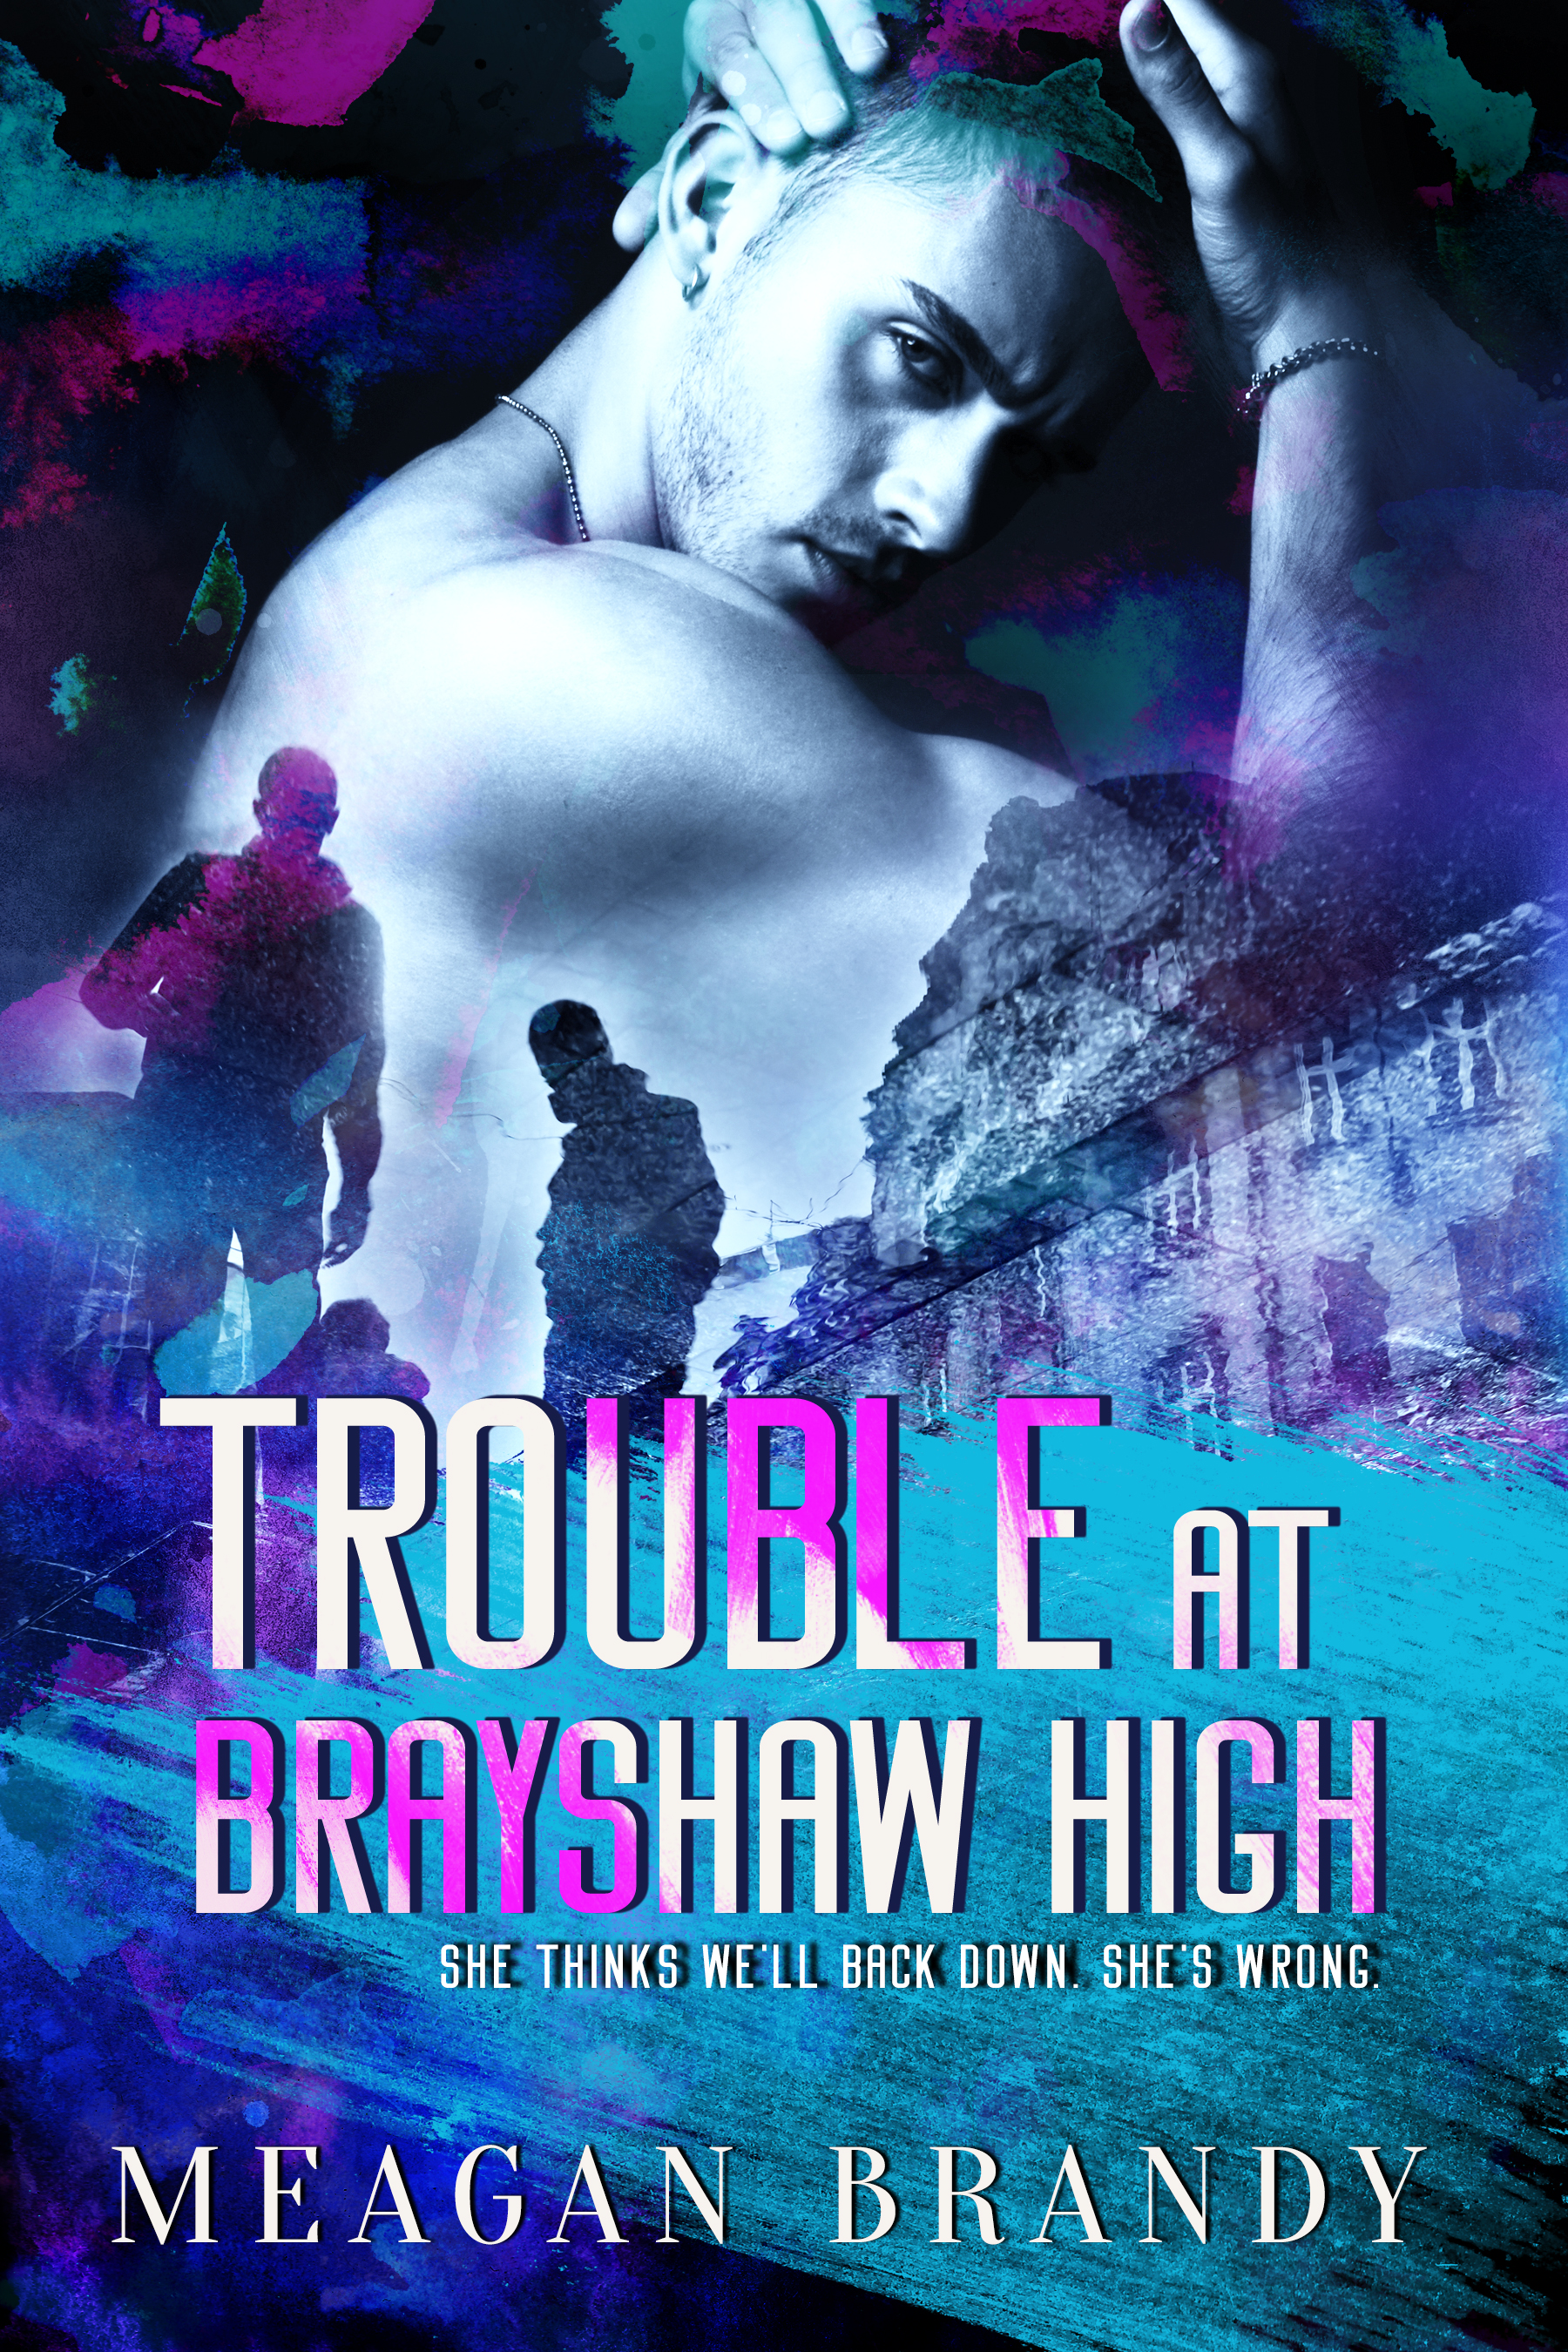 Trouble at Brayshaw High #MeaganBrandy [Release Blitz]